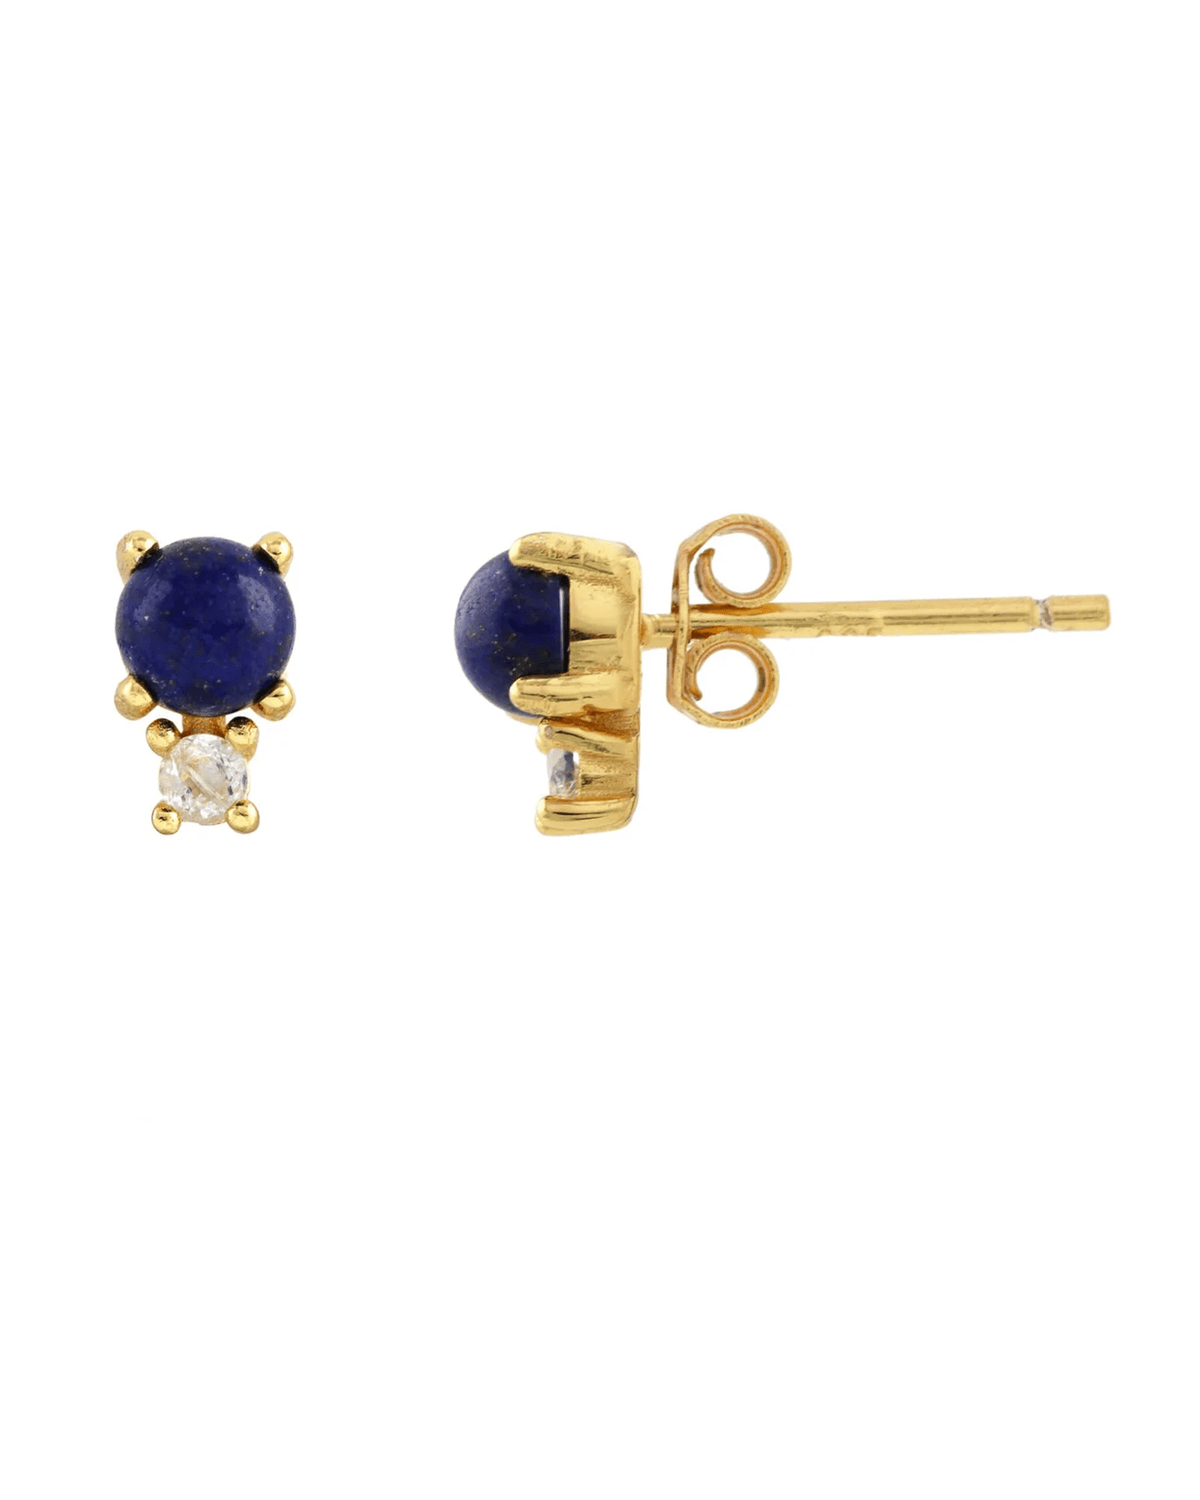 Kris Nations Jewelry Gold Two Stone Stud Earrings with Lapis and White Topaz